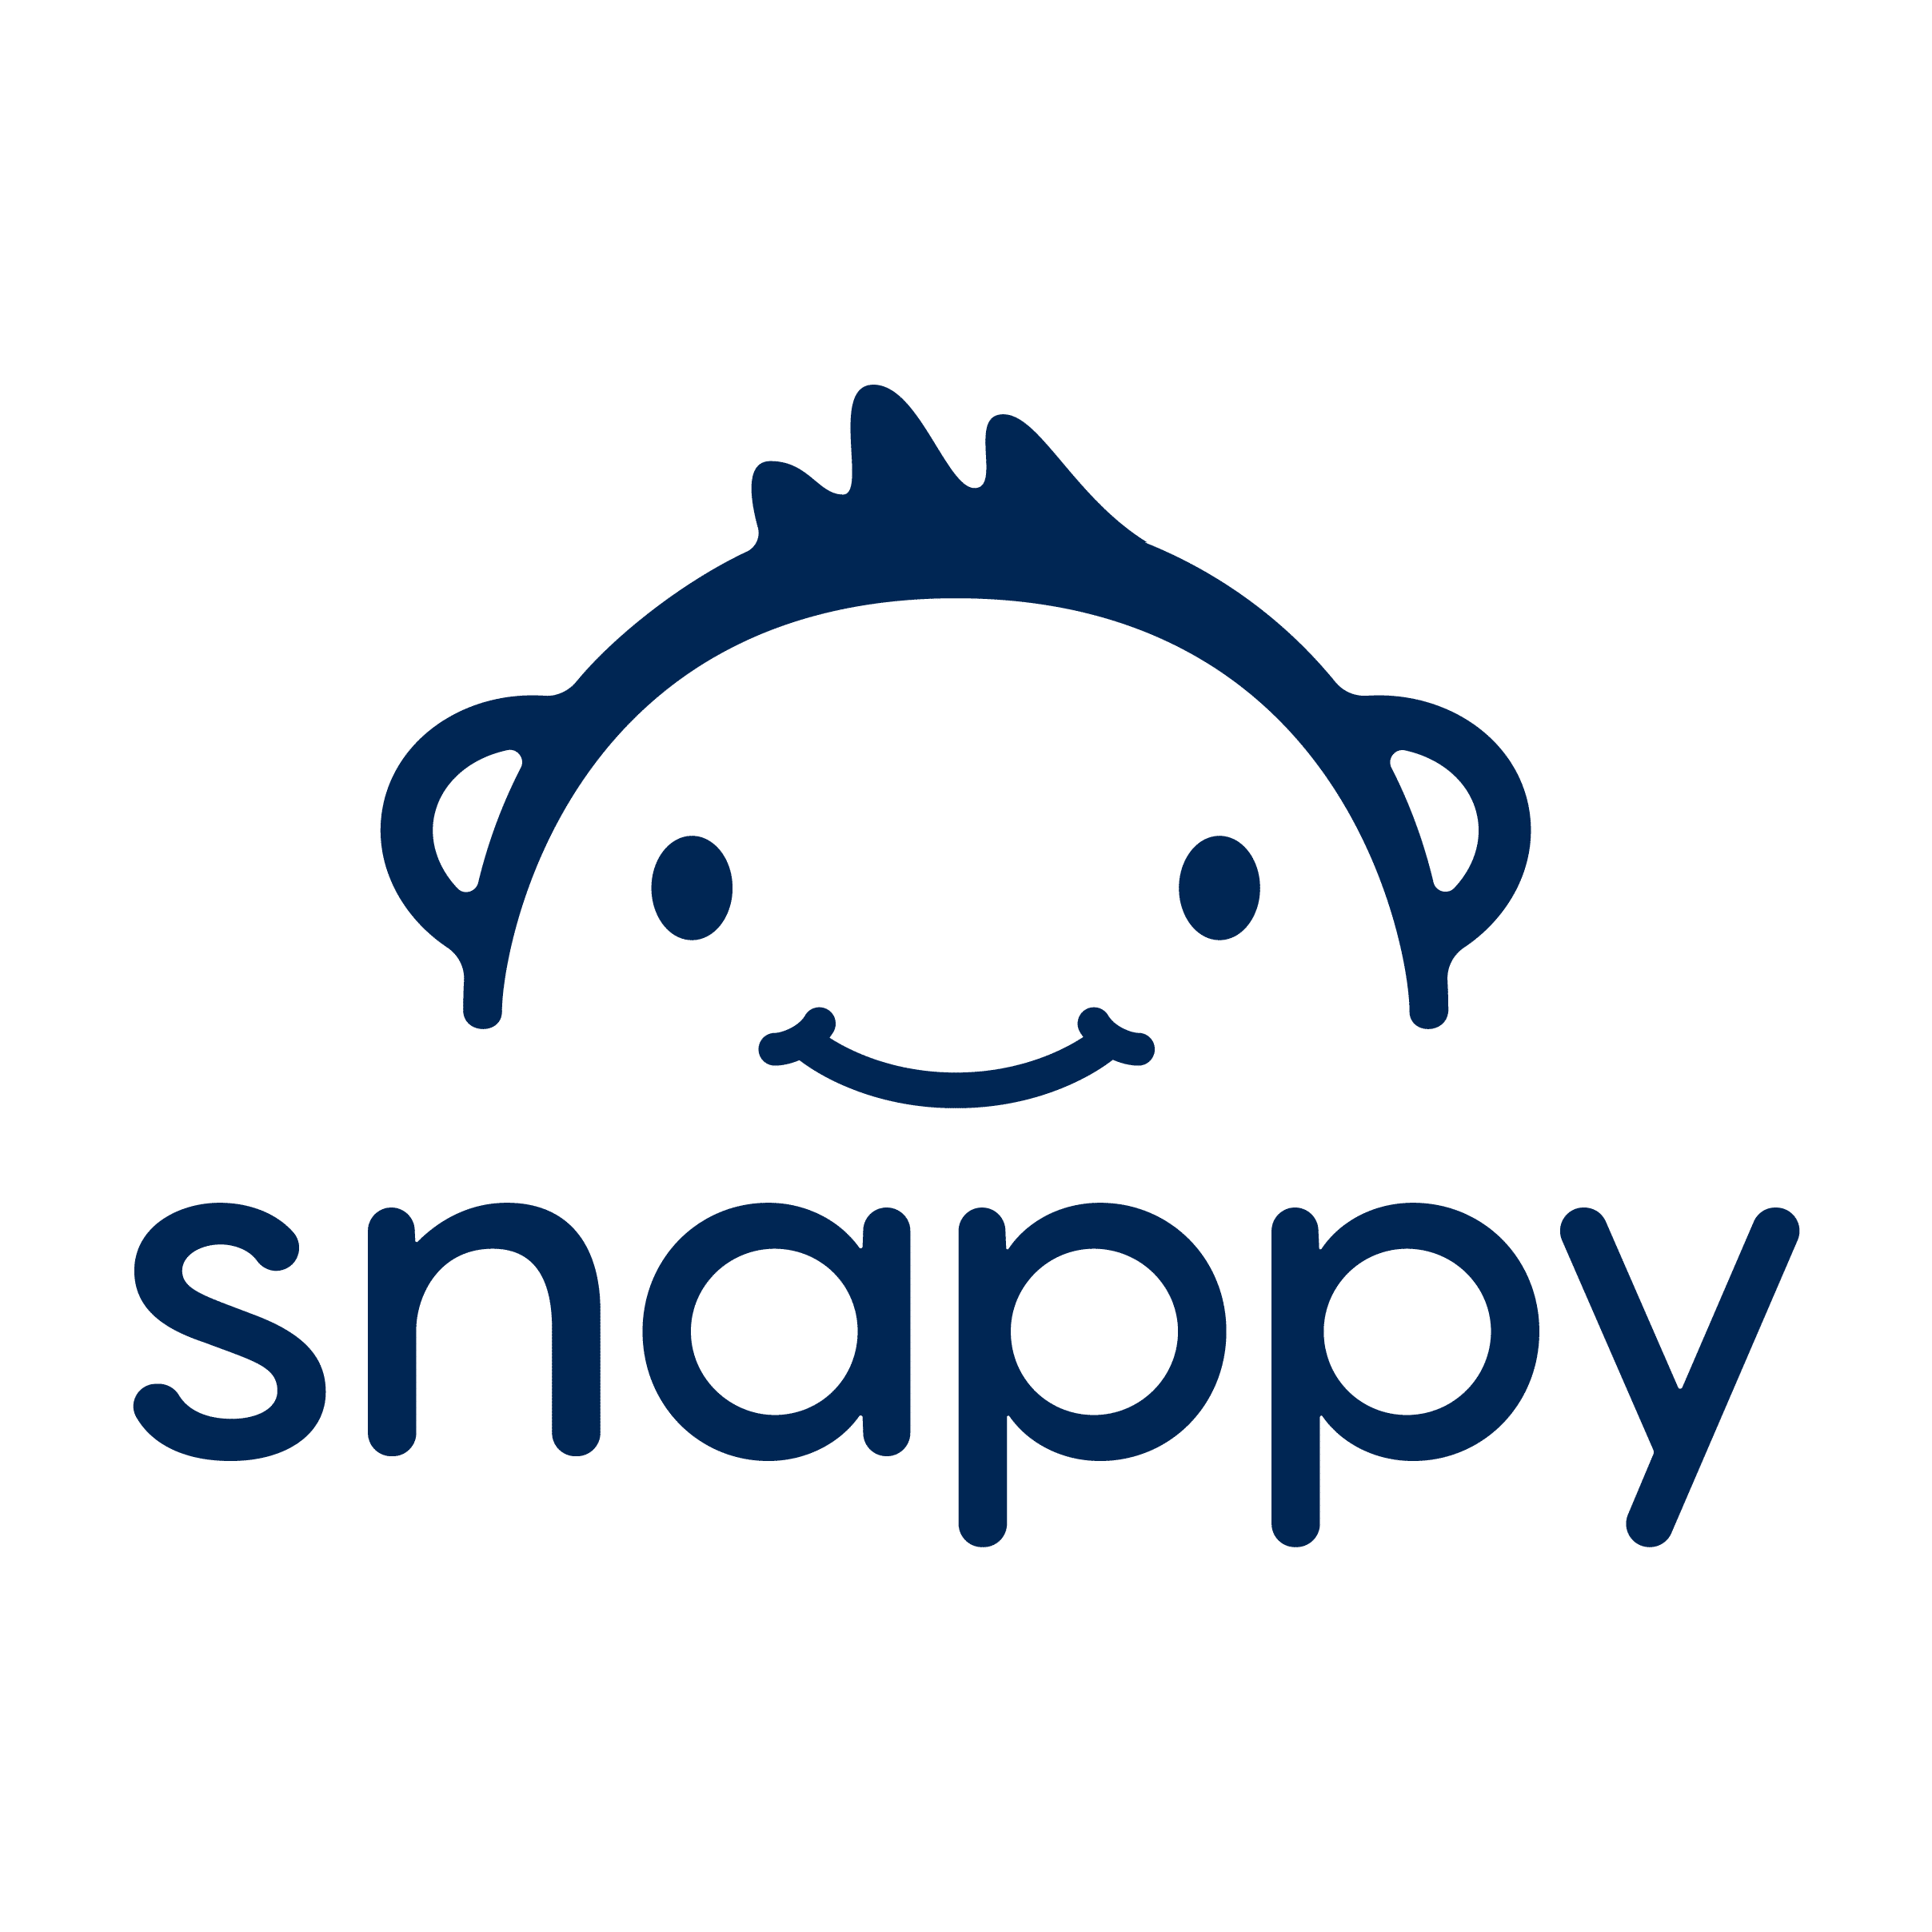 Snappy Gifts